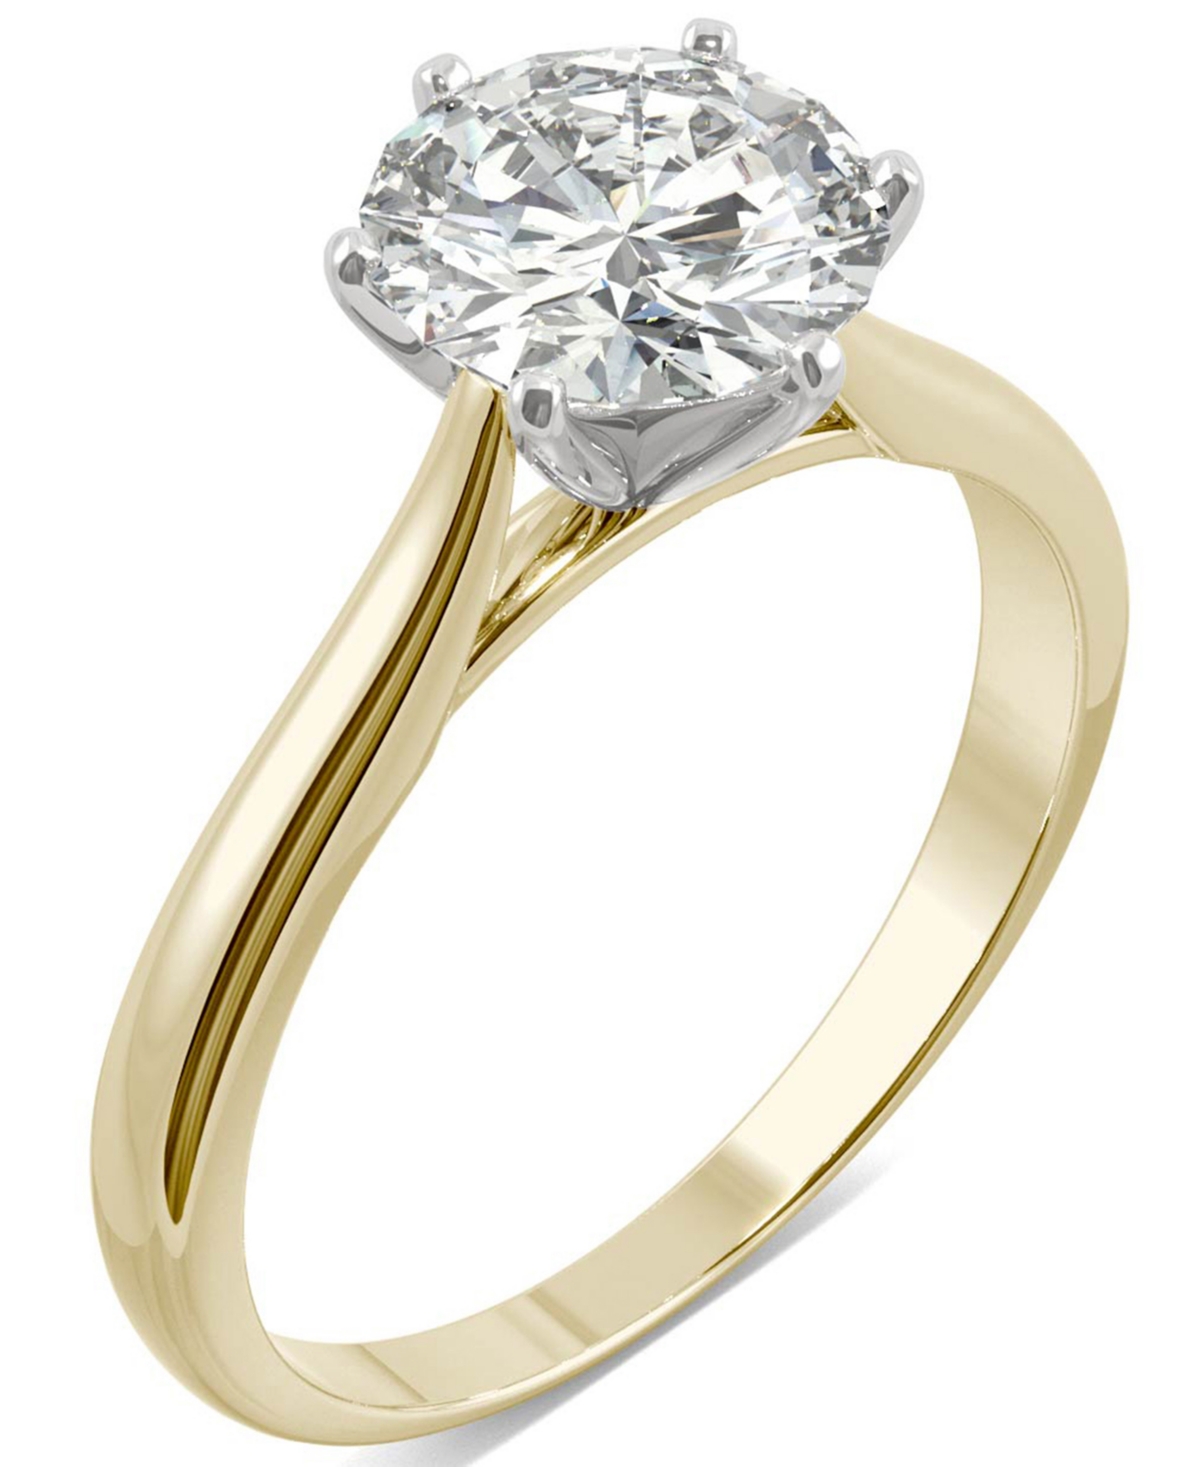 Charles & Colvard Moissanite Solitaire Engagement Ring 1-1/2 ct. t.w. Diamond Equivalent in 14k White Gold or 14k Yellow Gold